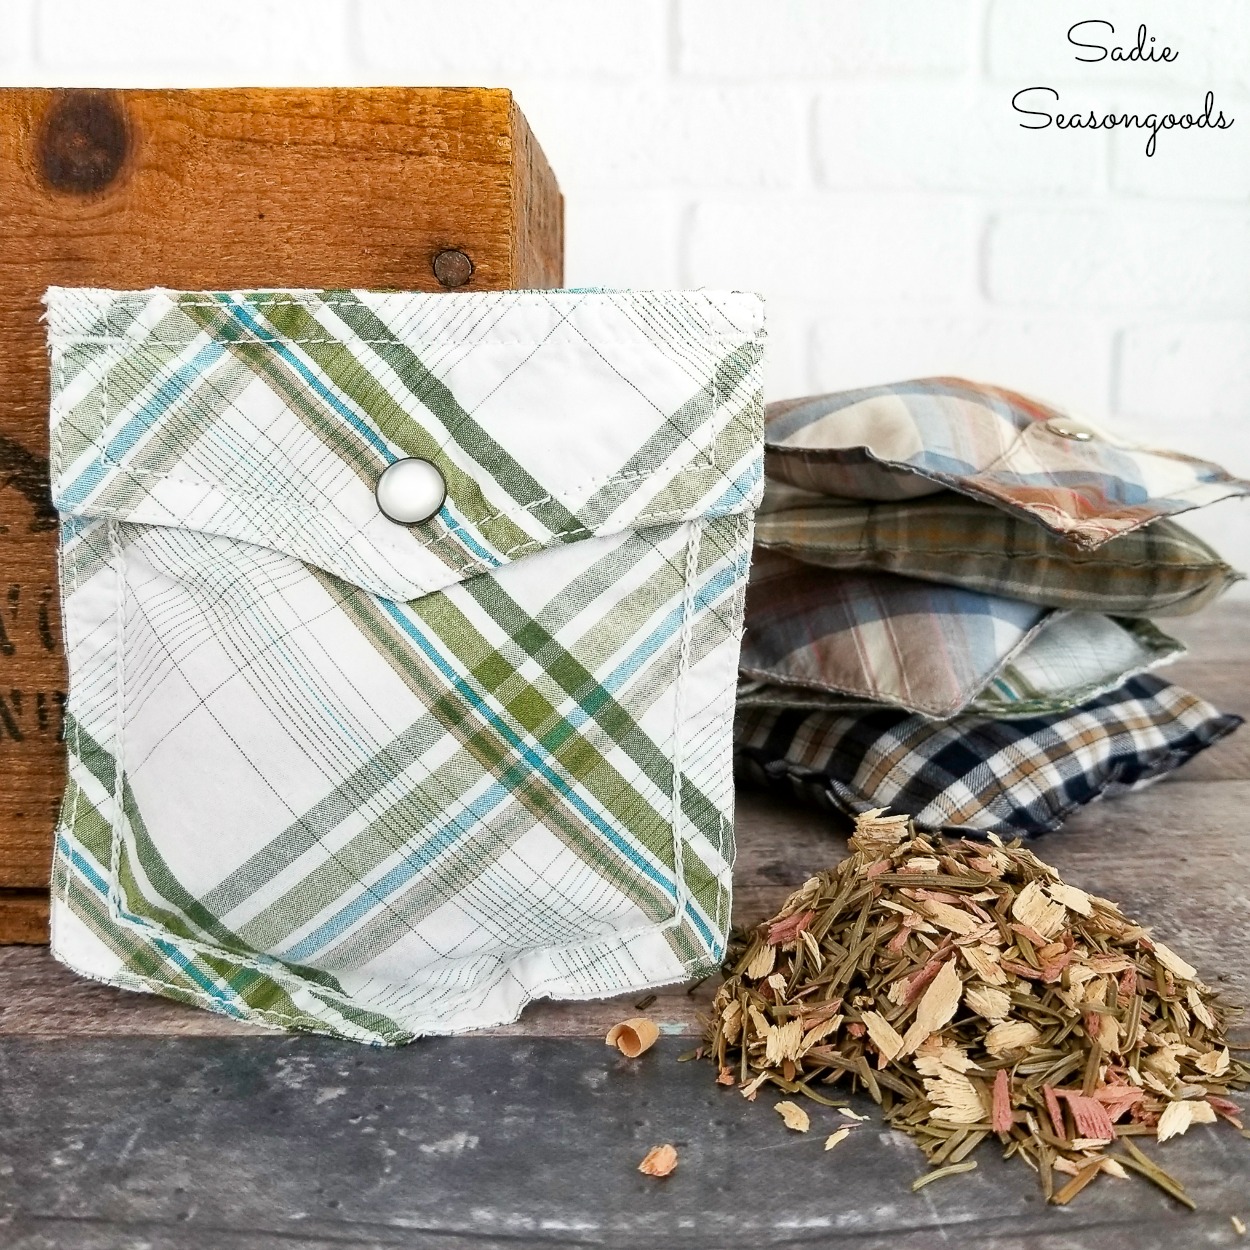 Scented sachets from shirt pockets as handmade gifts for him